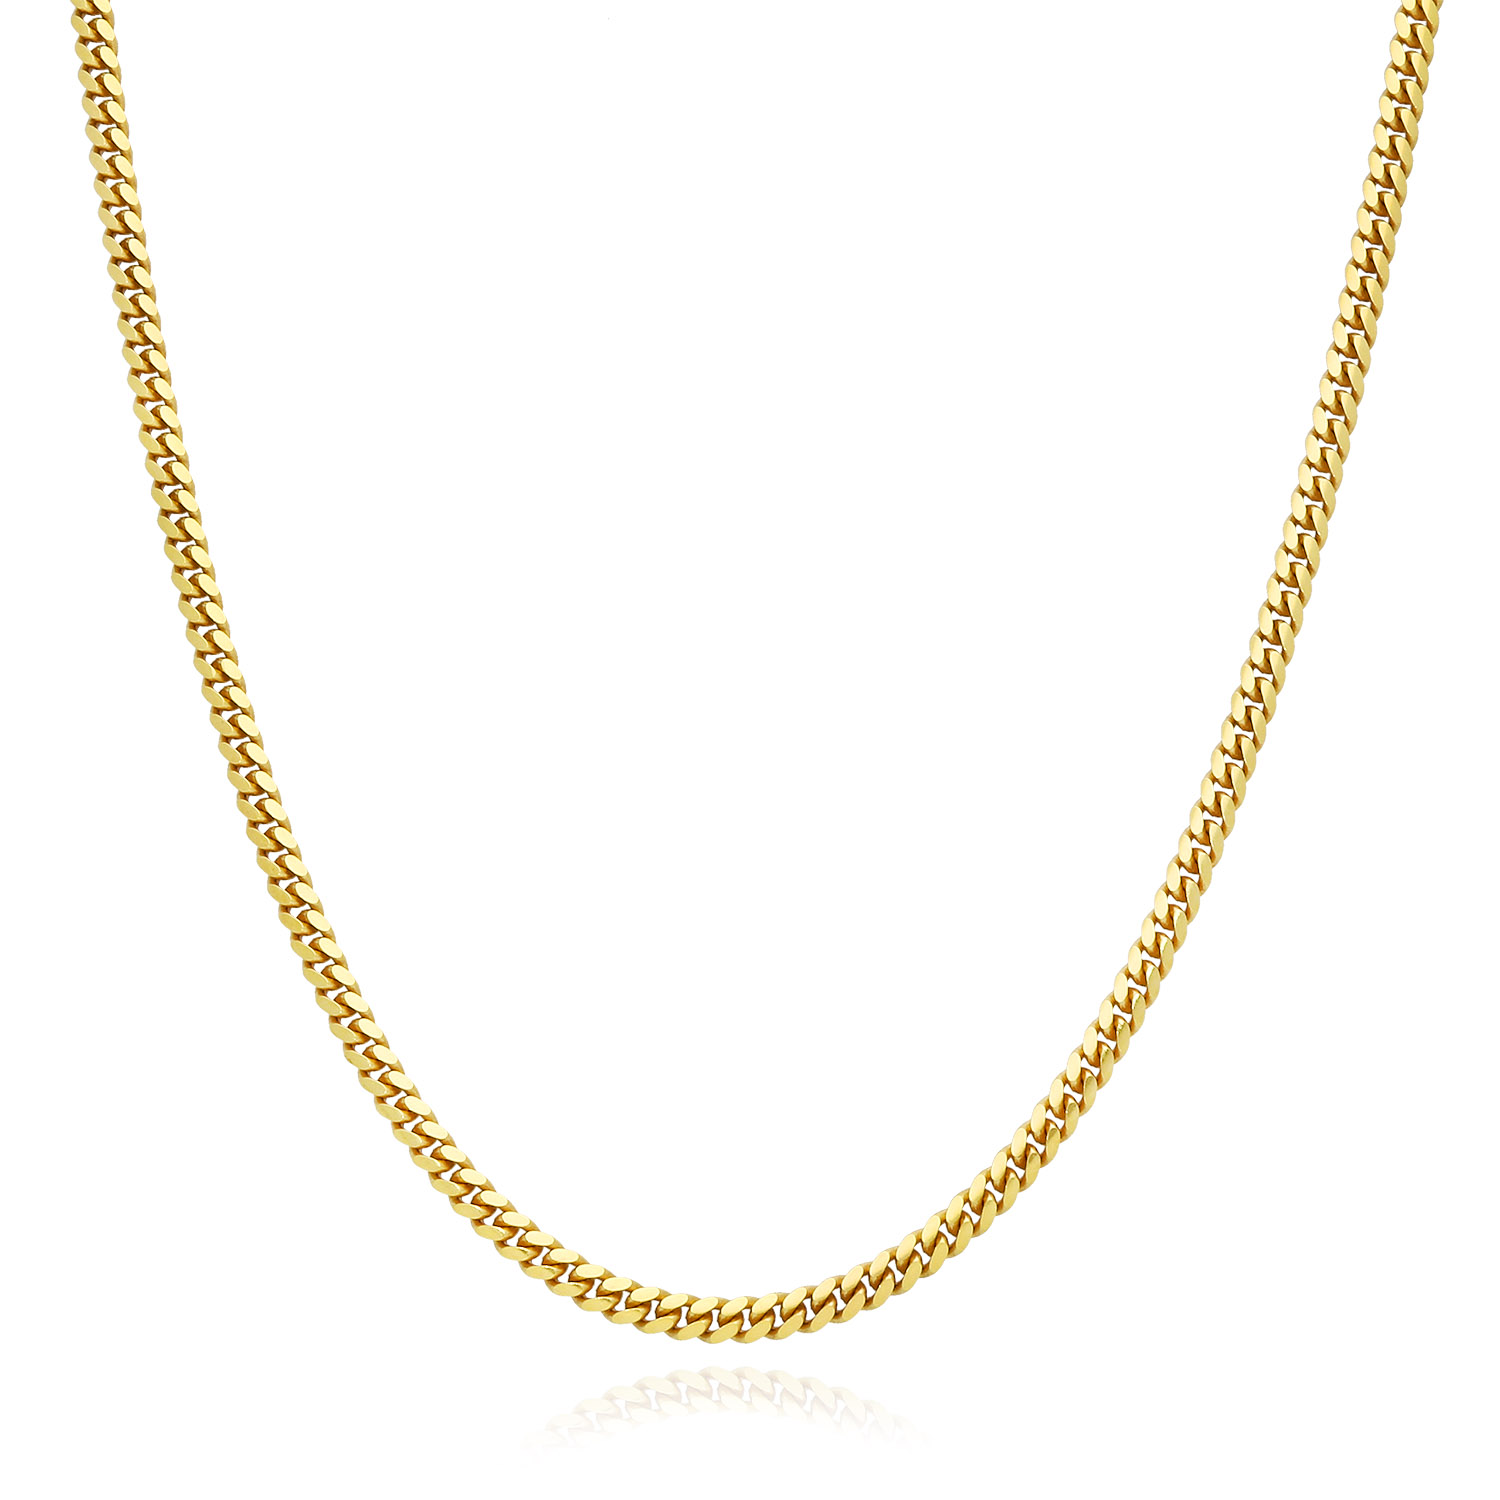 Solid 14K Yellow Gold Over Silver 2.5mm Miami Cuban Chain Necklace 16"-30" - 24"